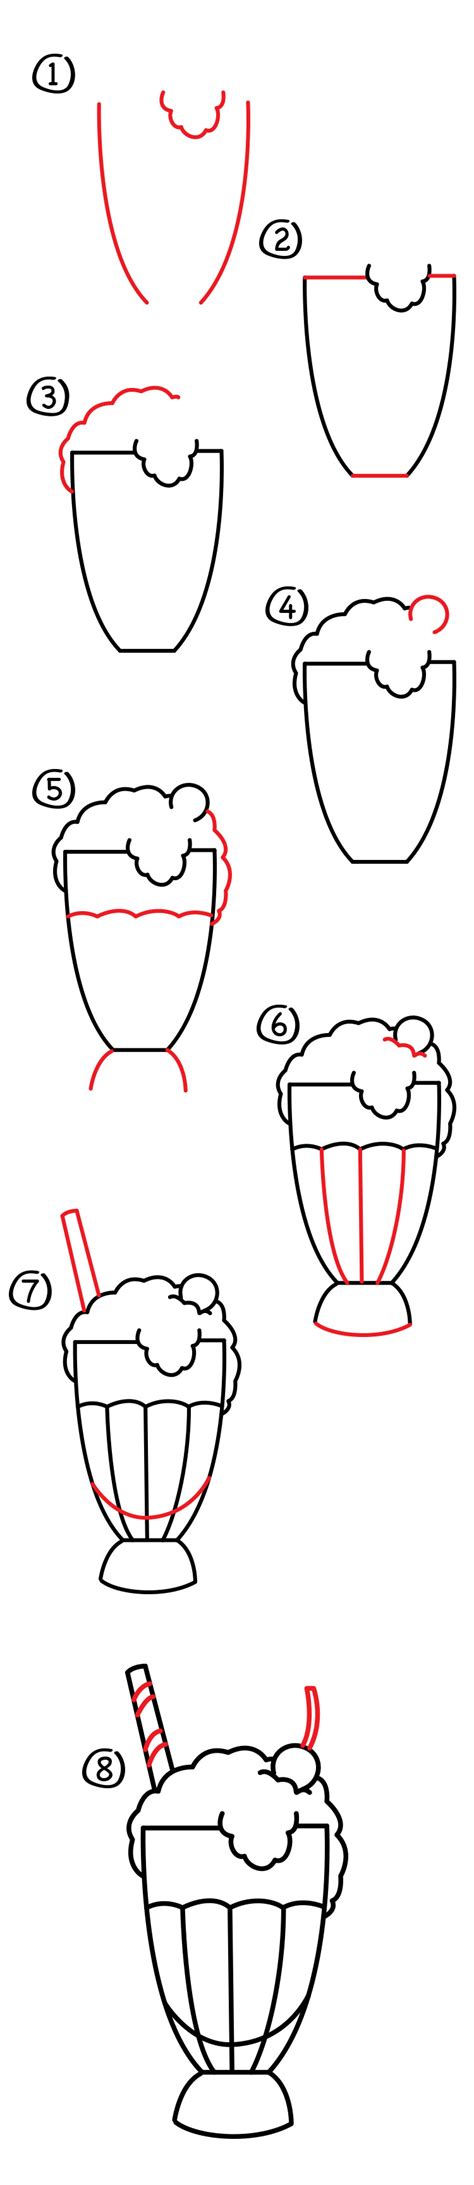 1.draw a circle first, this is the bee's head. How To Draw A Milkshake - Art For Kids Hub